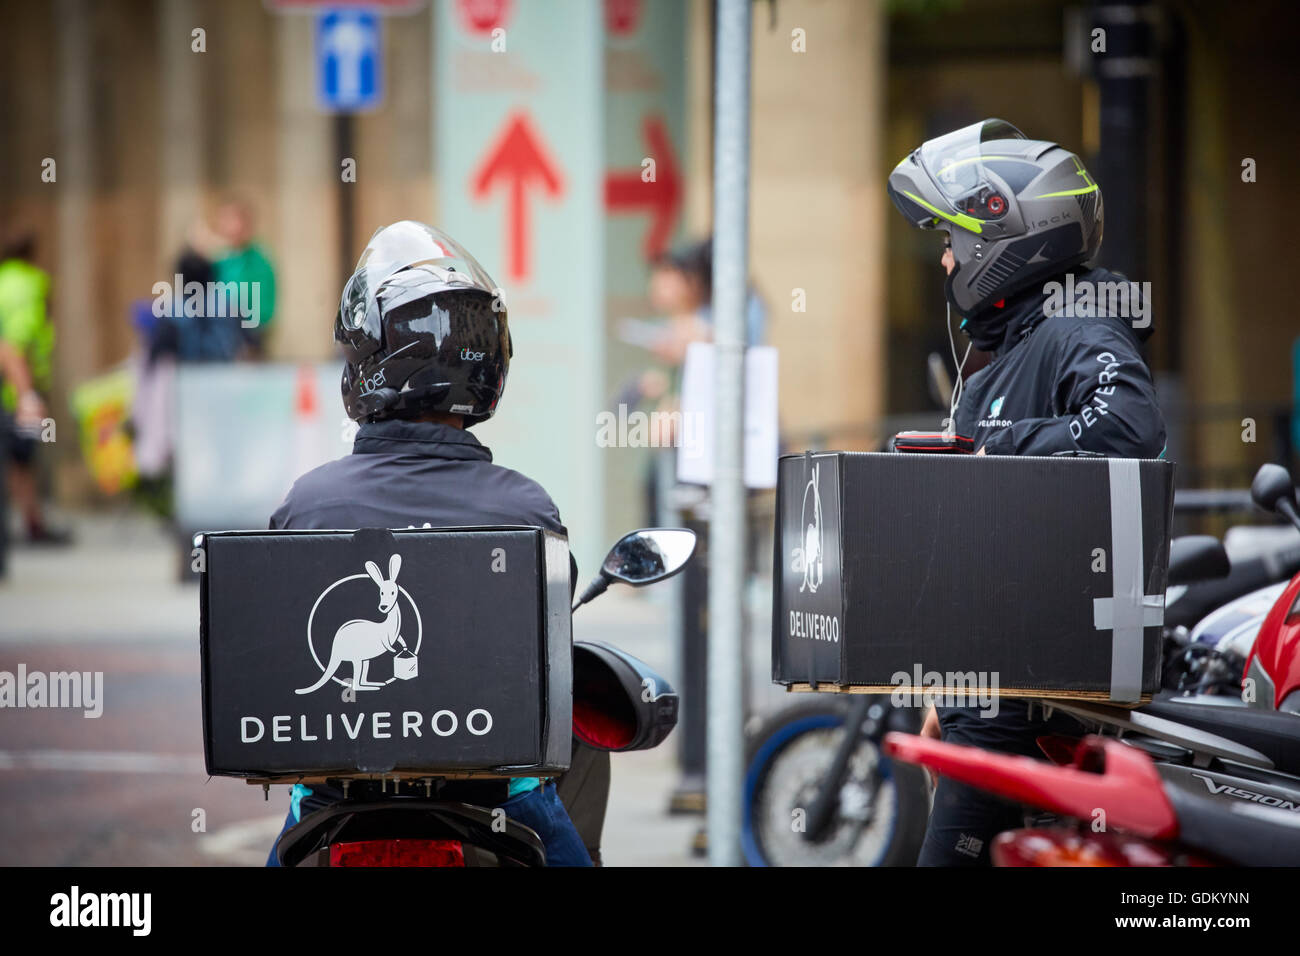 Deliver restaurant delivery service   Motorbike courier driver delivery deliveries waiting resting between drops take away food Stock Photo